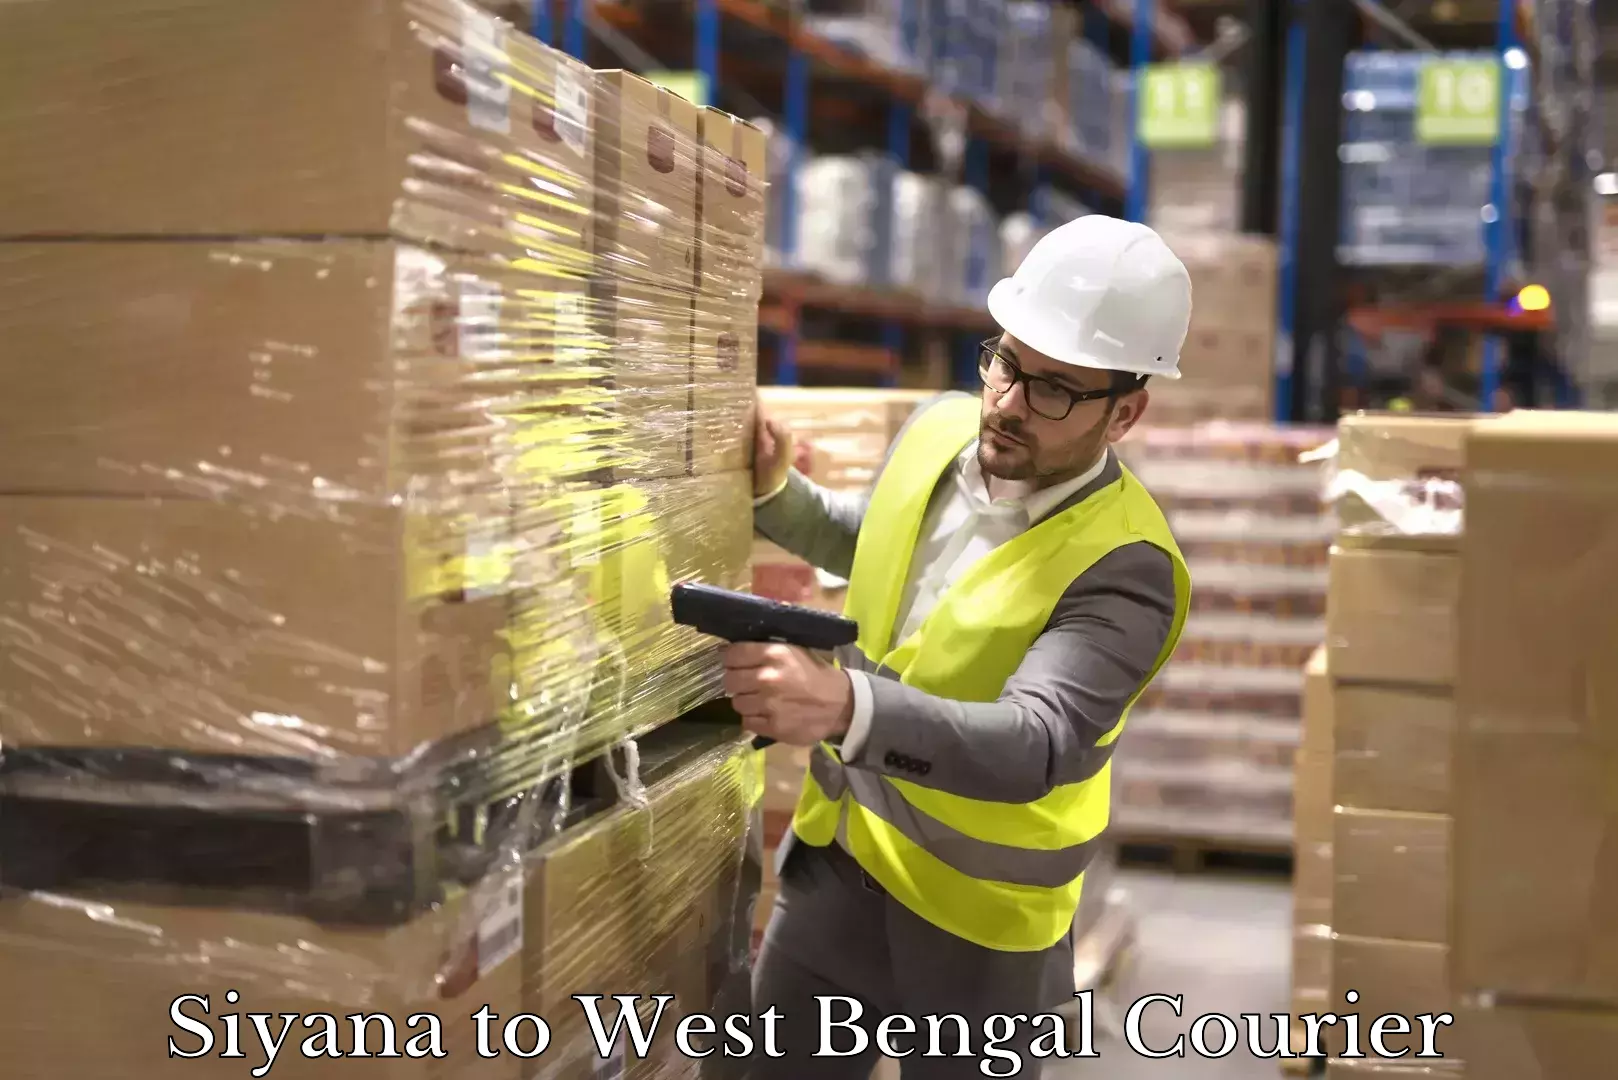 International courier networks Siyana to West Bengal